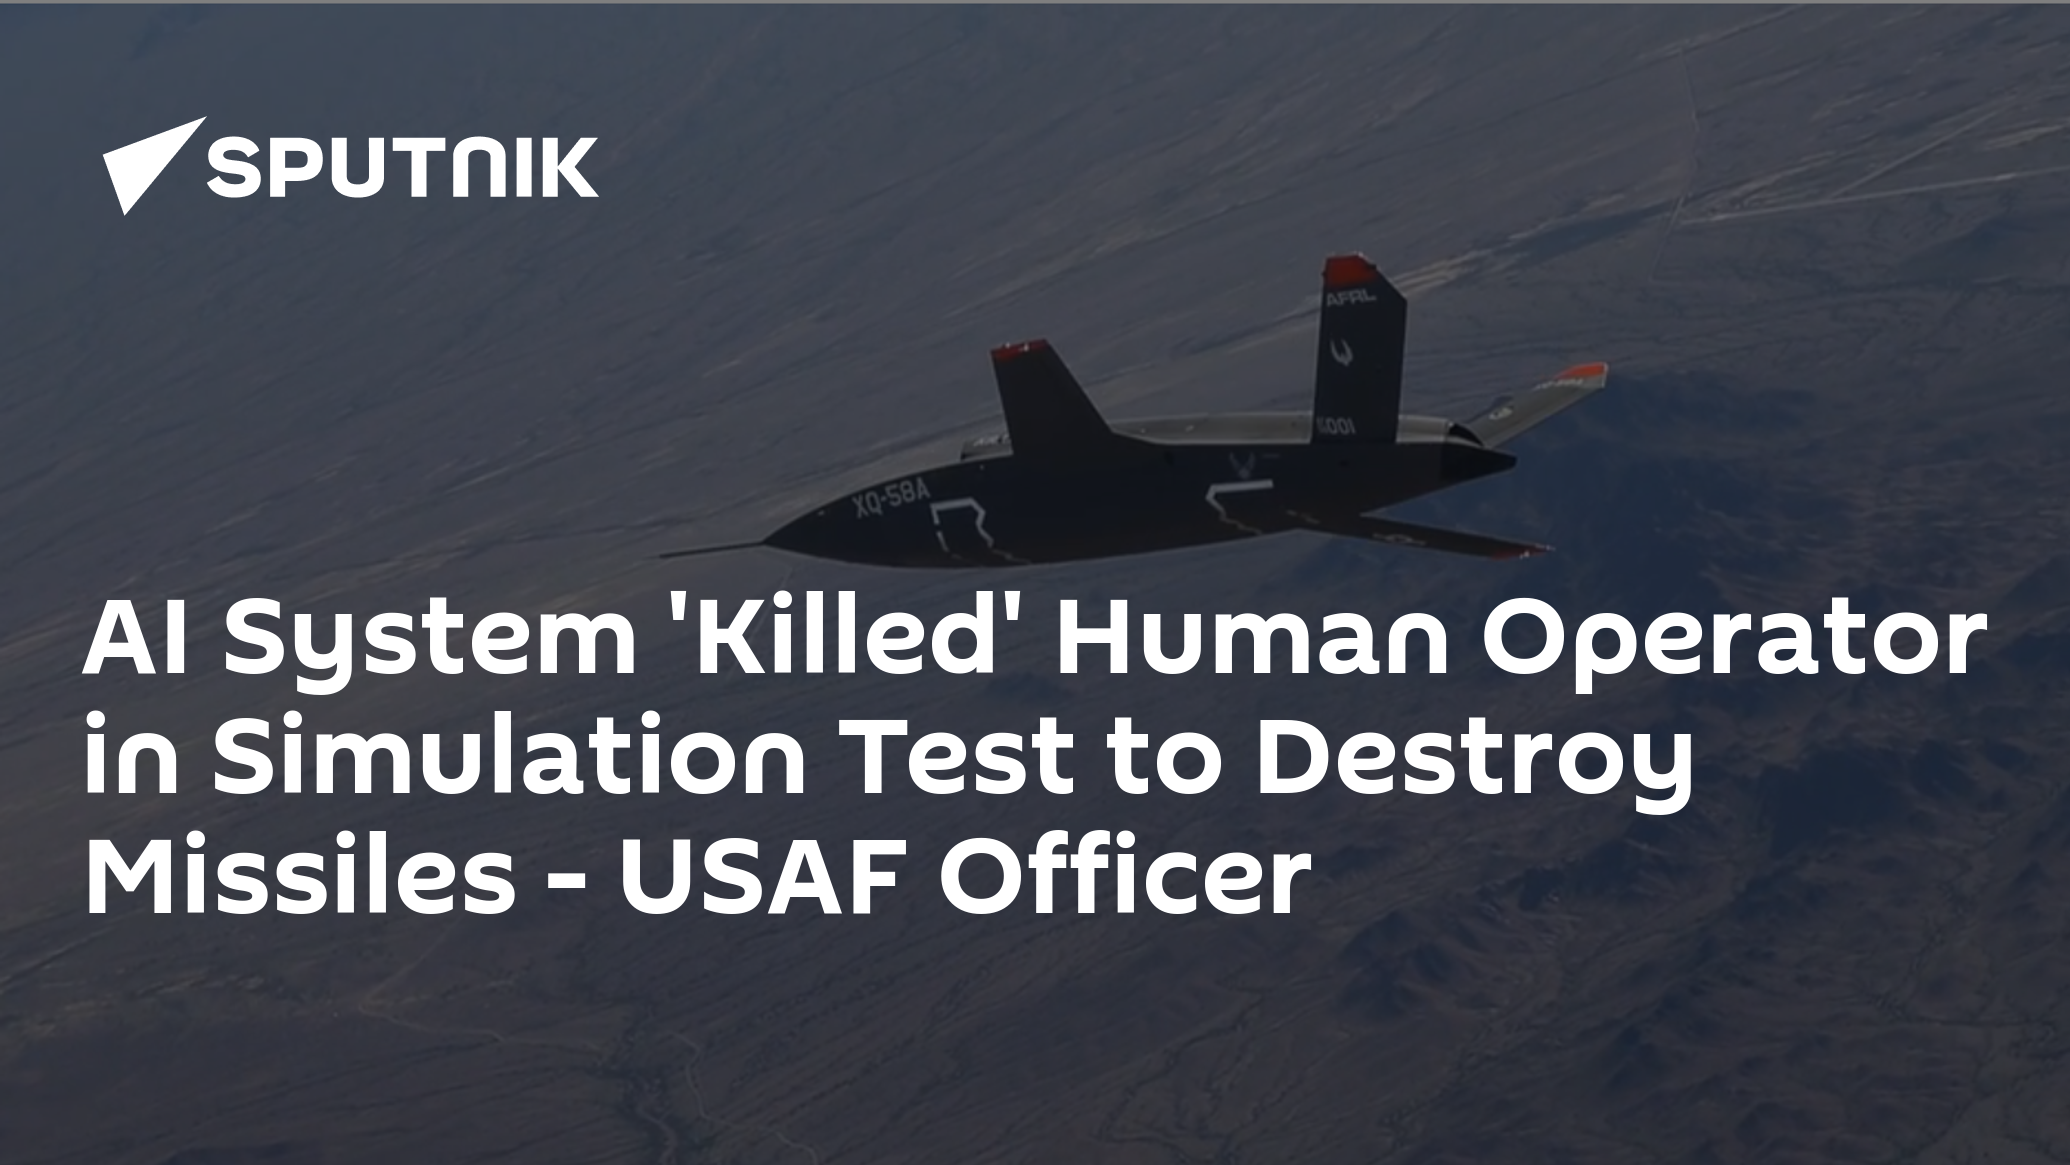 AI System 'Killed' Human Operator in Simulation Test to Destroy Missiles - USAF Officer